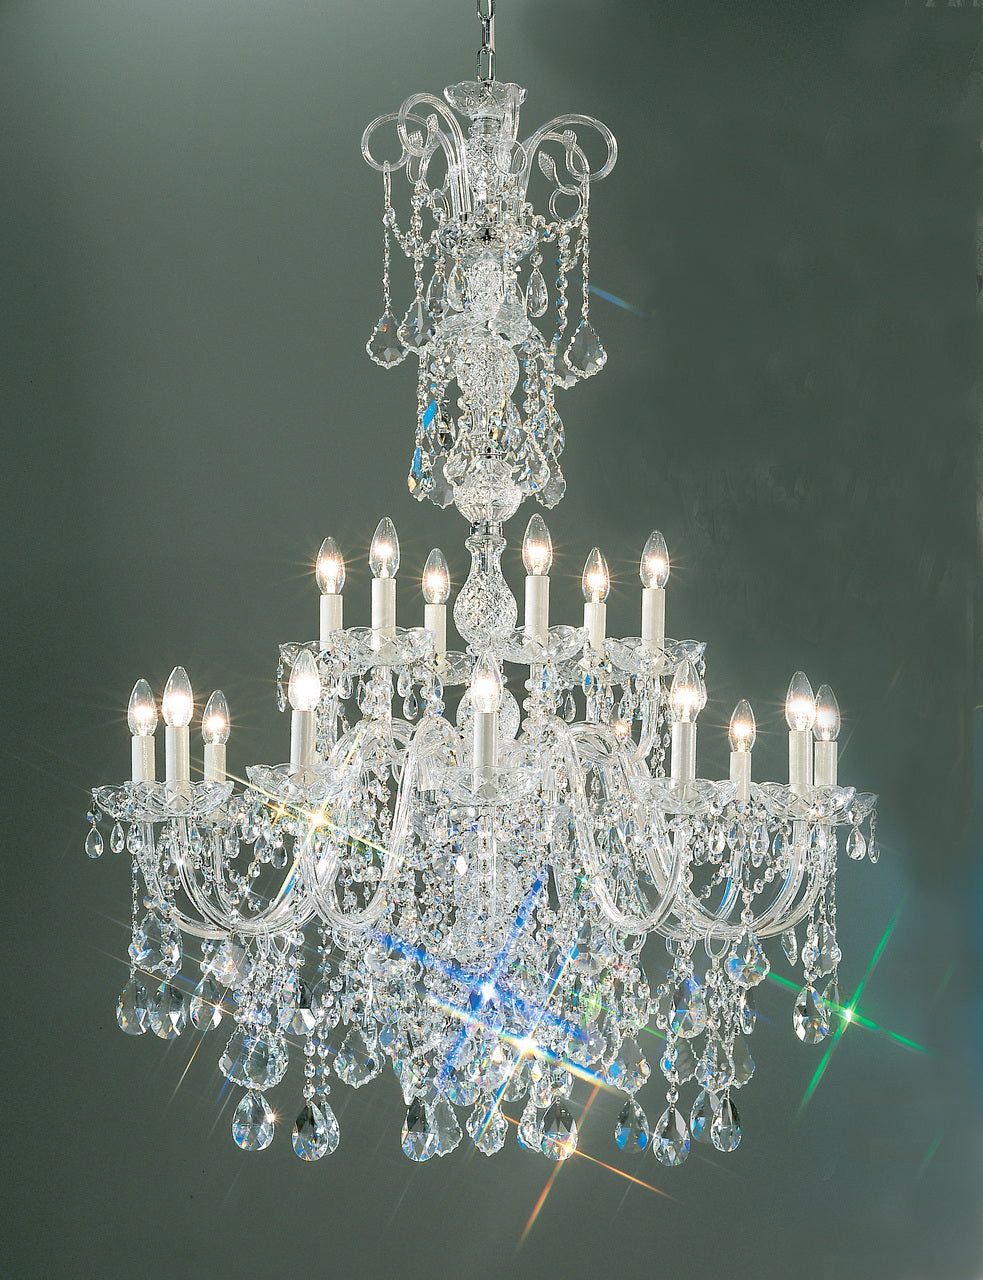 Classic Lighting 8263 CH C Bohemia Crystal/Glass Chandelier in Chrome (Imported from Italy)